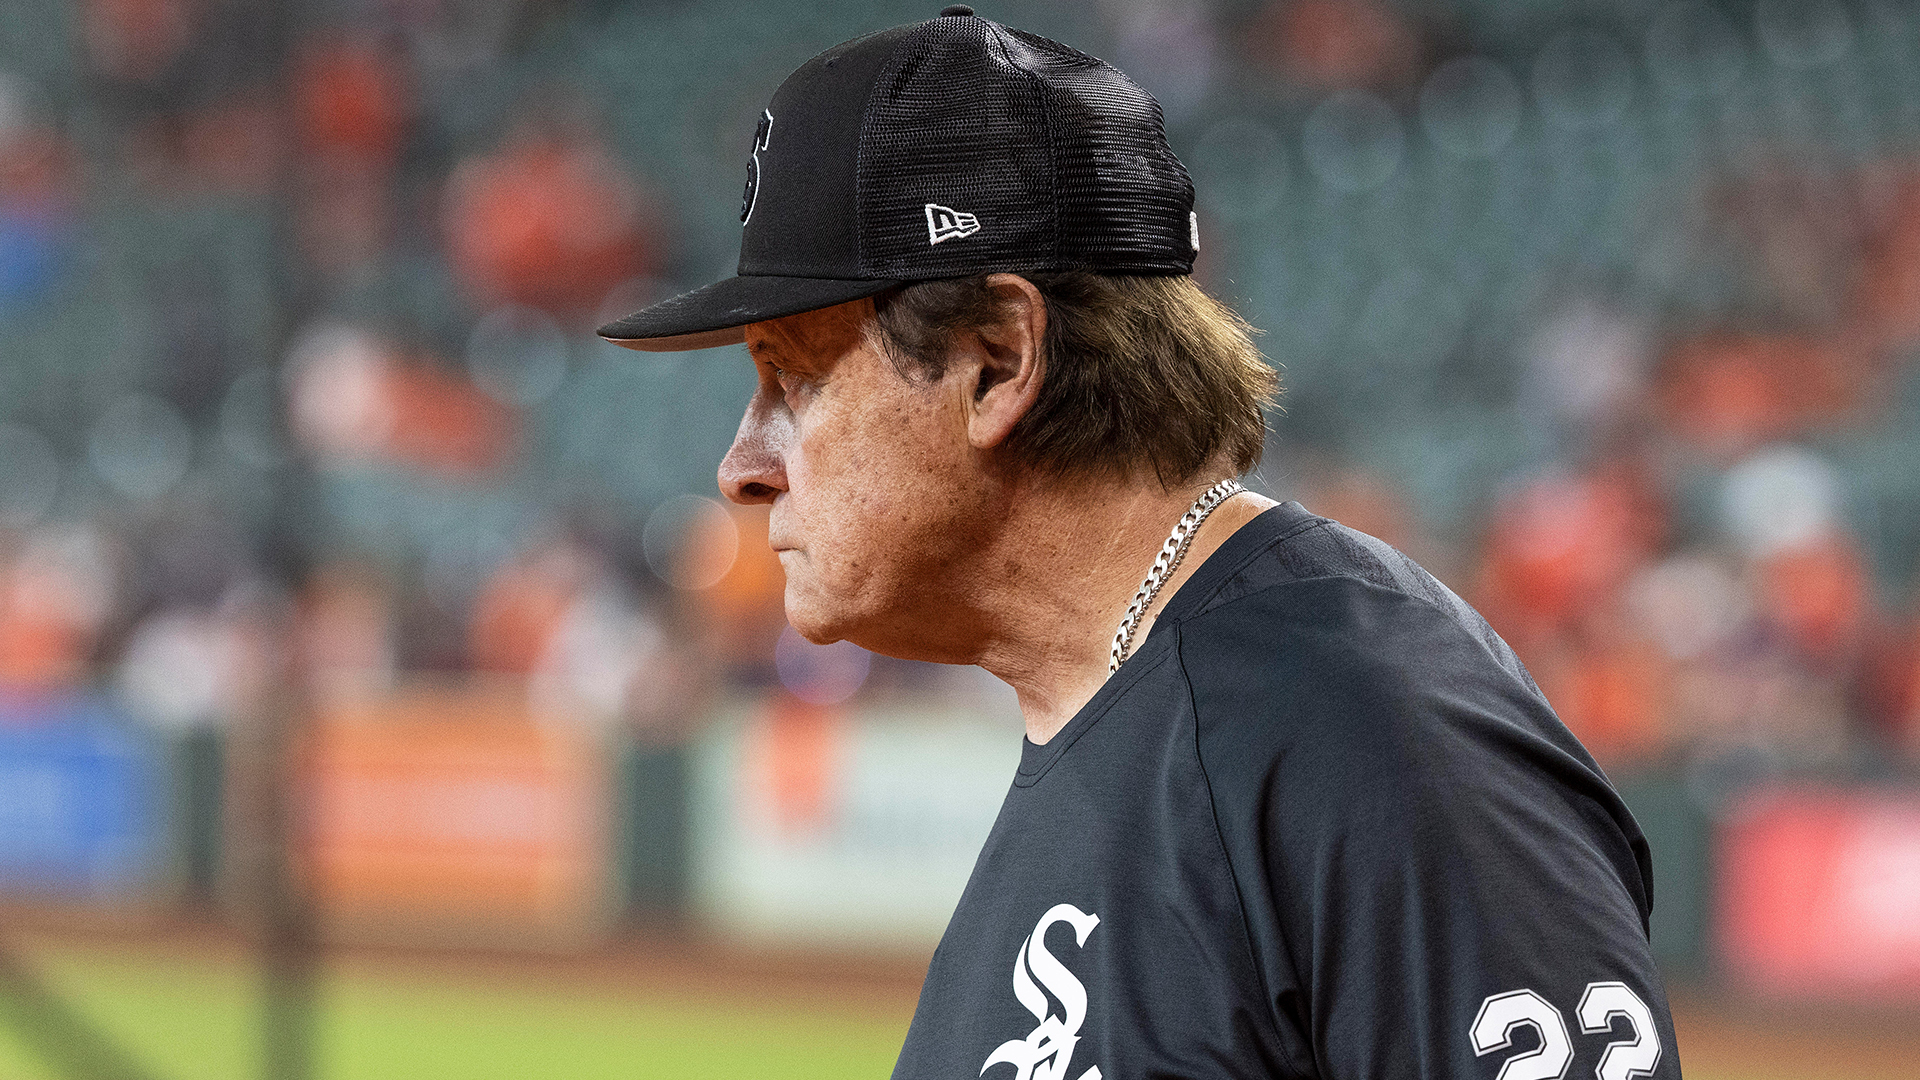 White Sox manager Tony La Russa responds to fans heckling at Blue